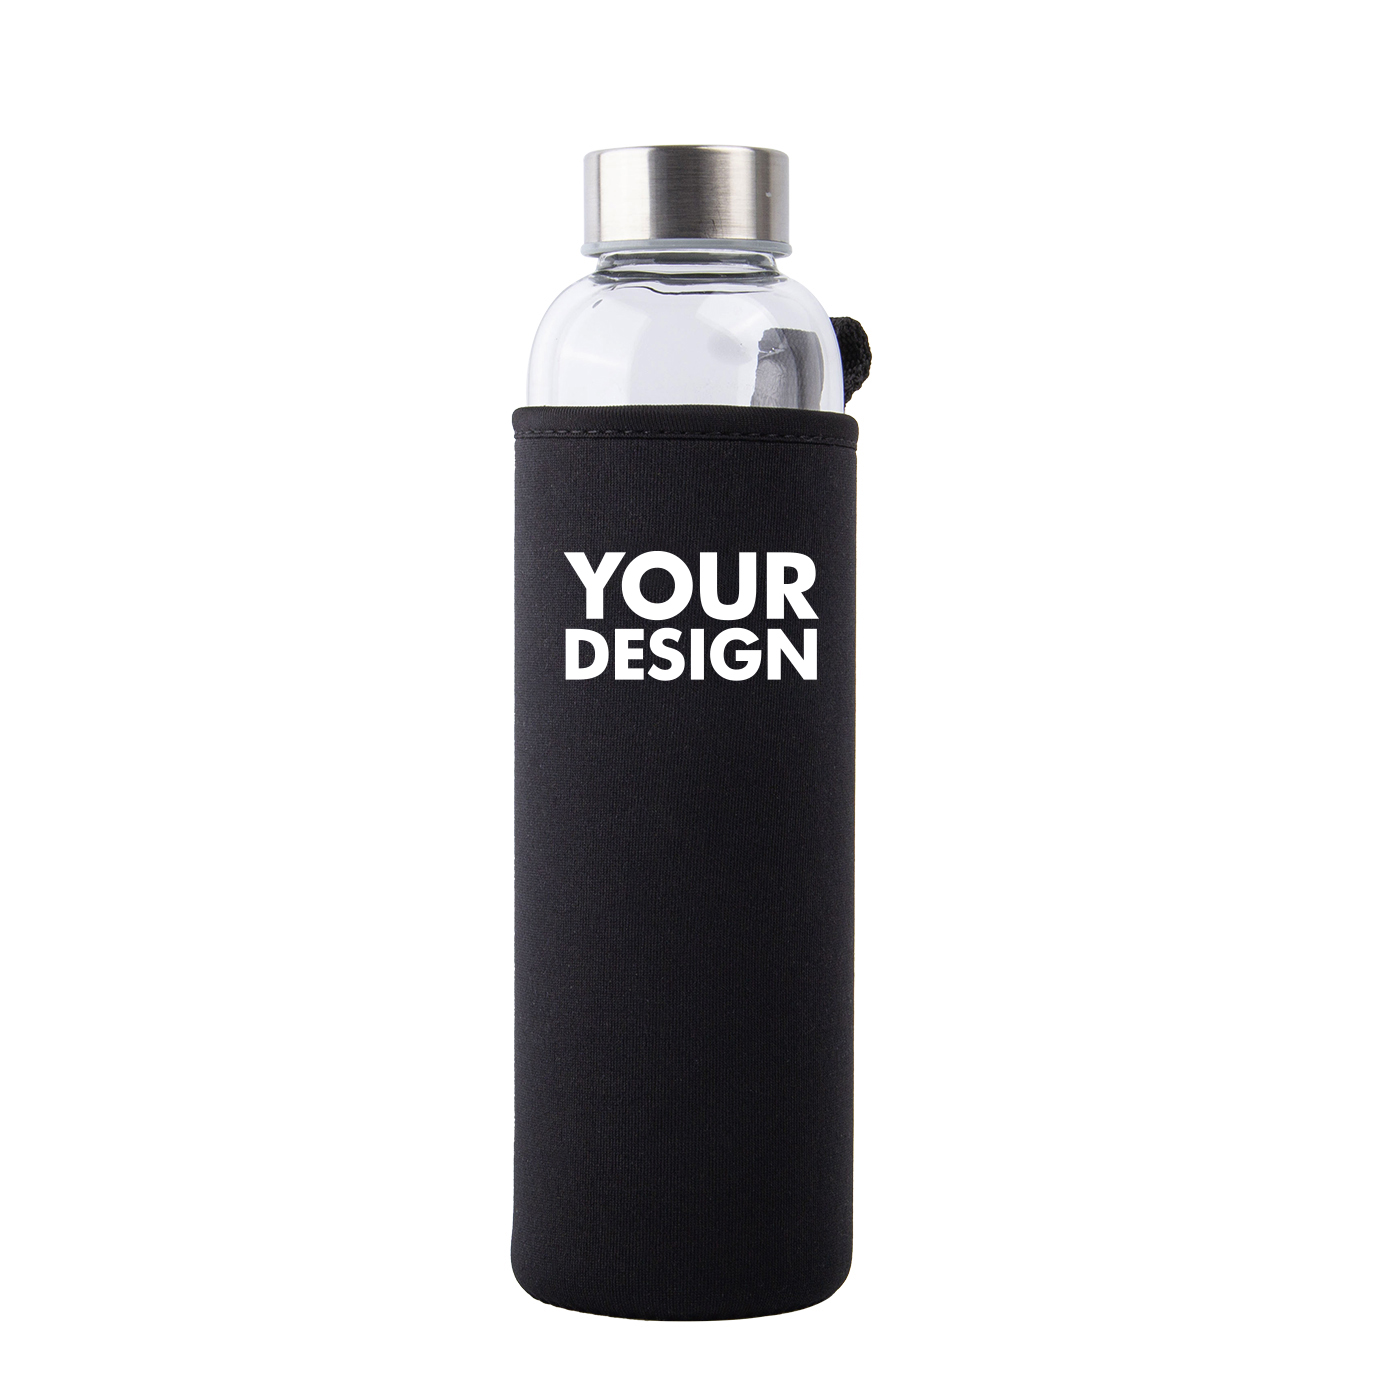 19 oz. Glass Water Bottle With Nylon Sleeve1